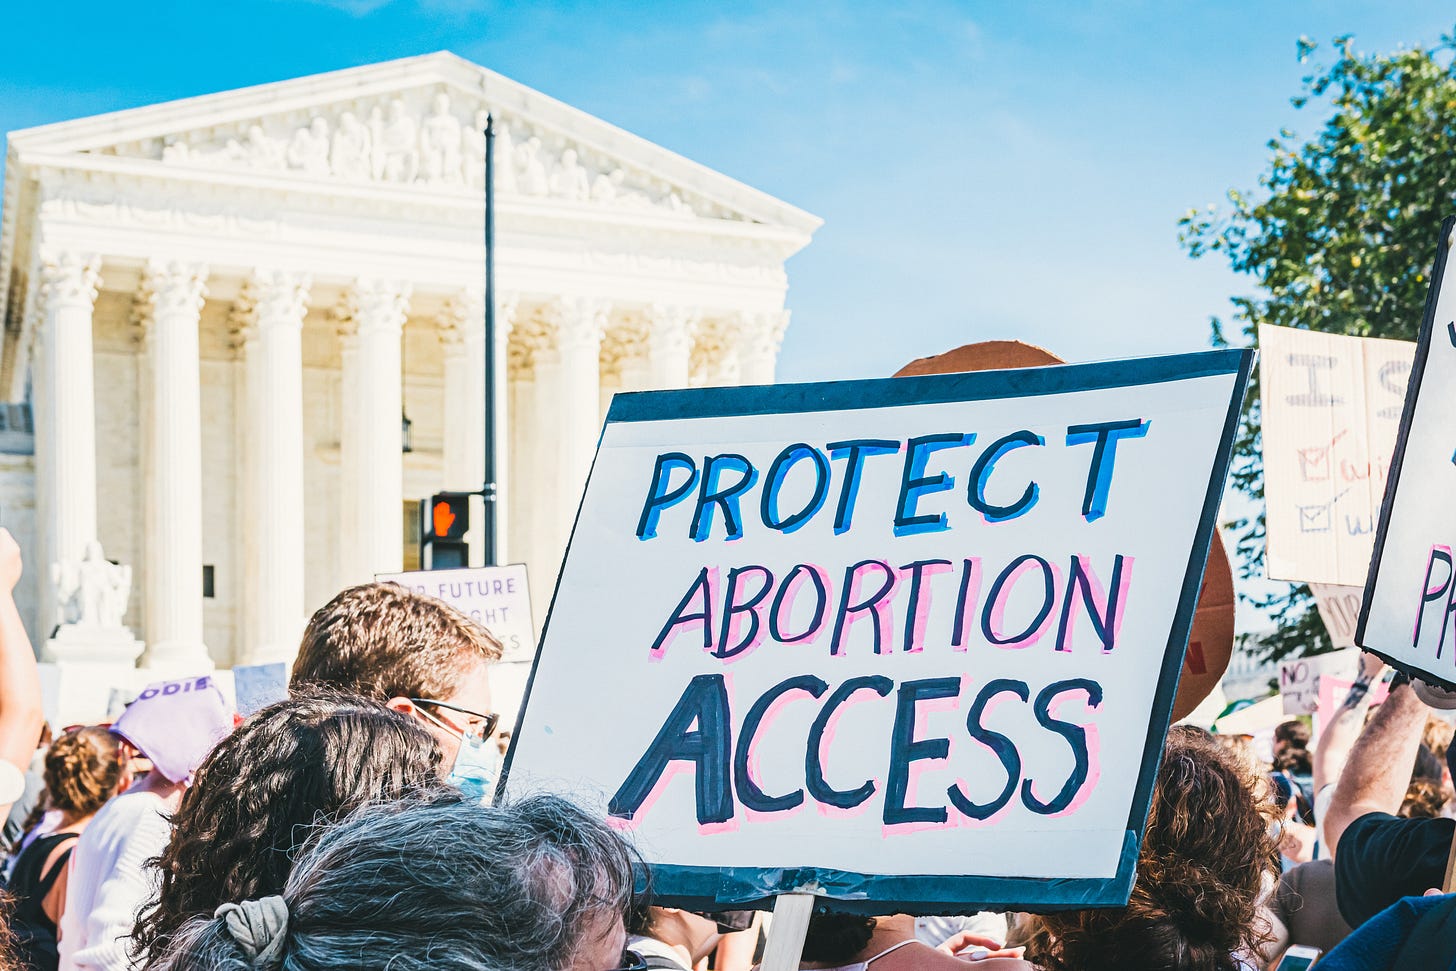 A close-up of a handwritten sign at an abortion rights protest. The sign says ‘PROTECT ABORTION ACCESS.’ Photo by Gayatri Malhotra on Unsplash